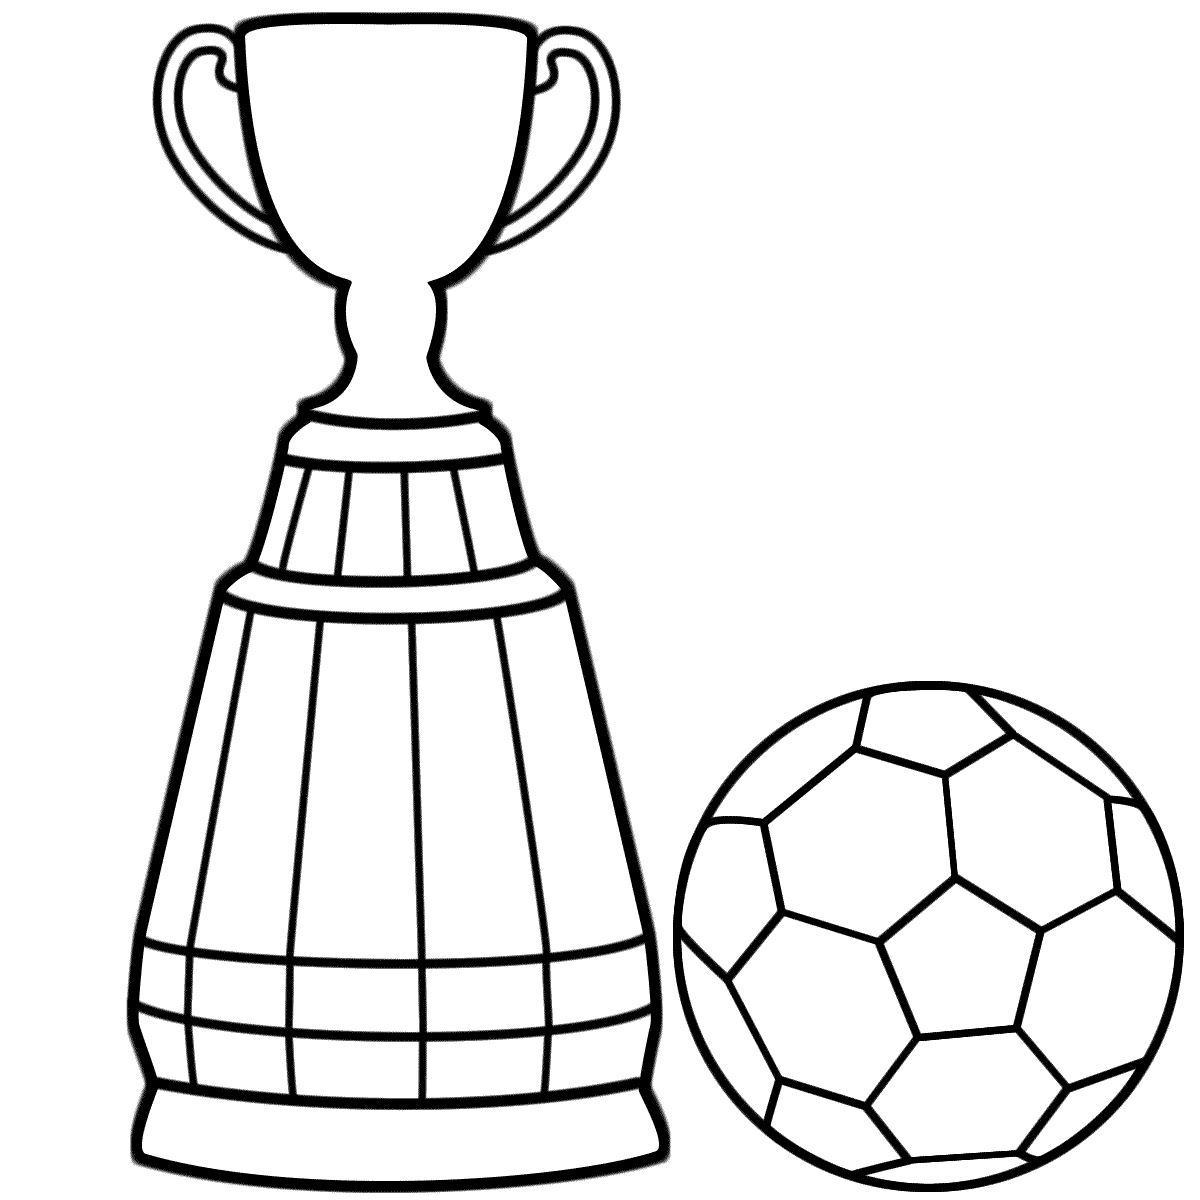 soccer-ball-coloring-pages-download-and-print-for-free